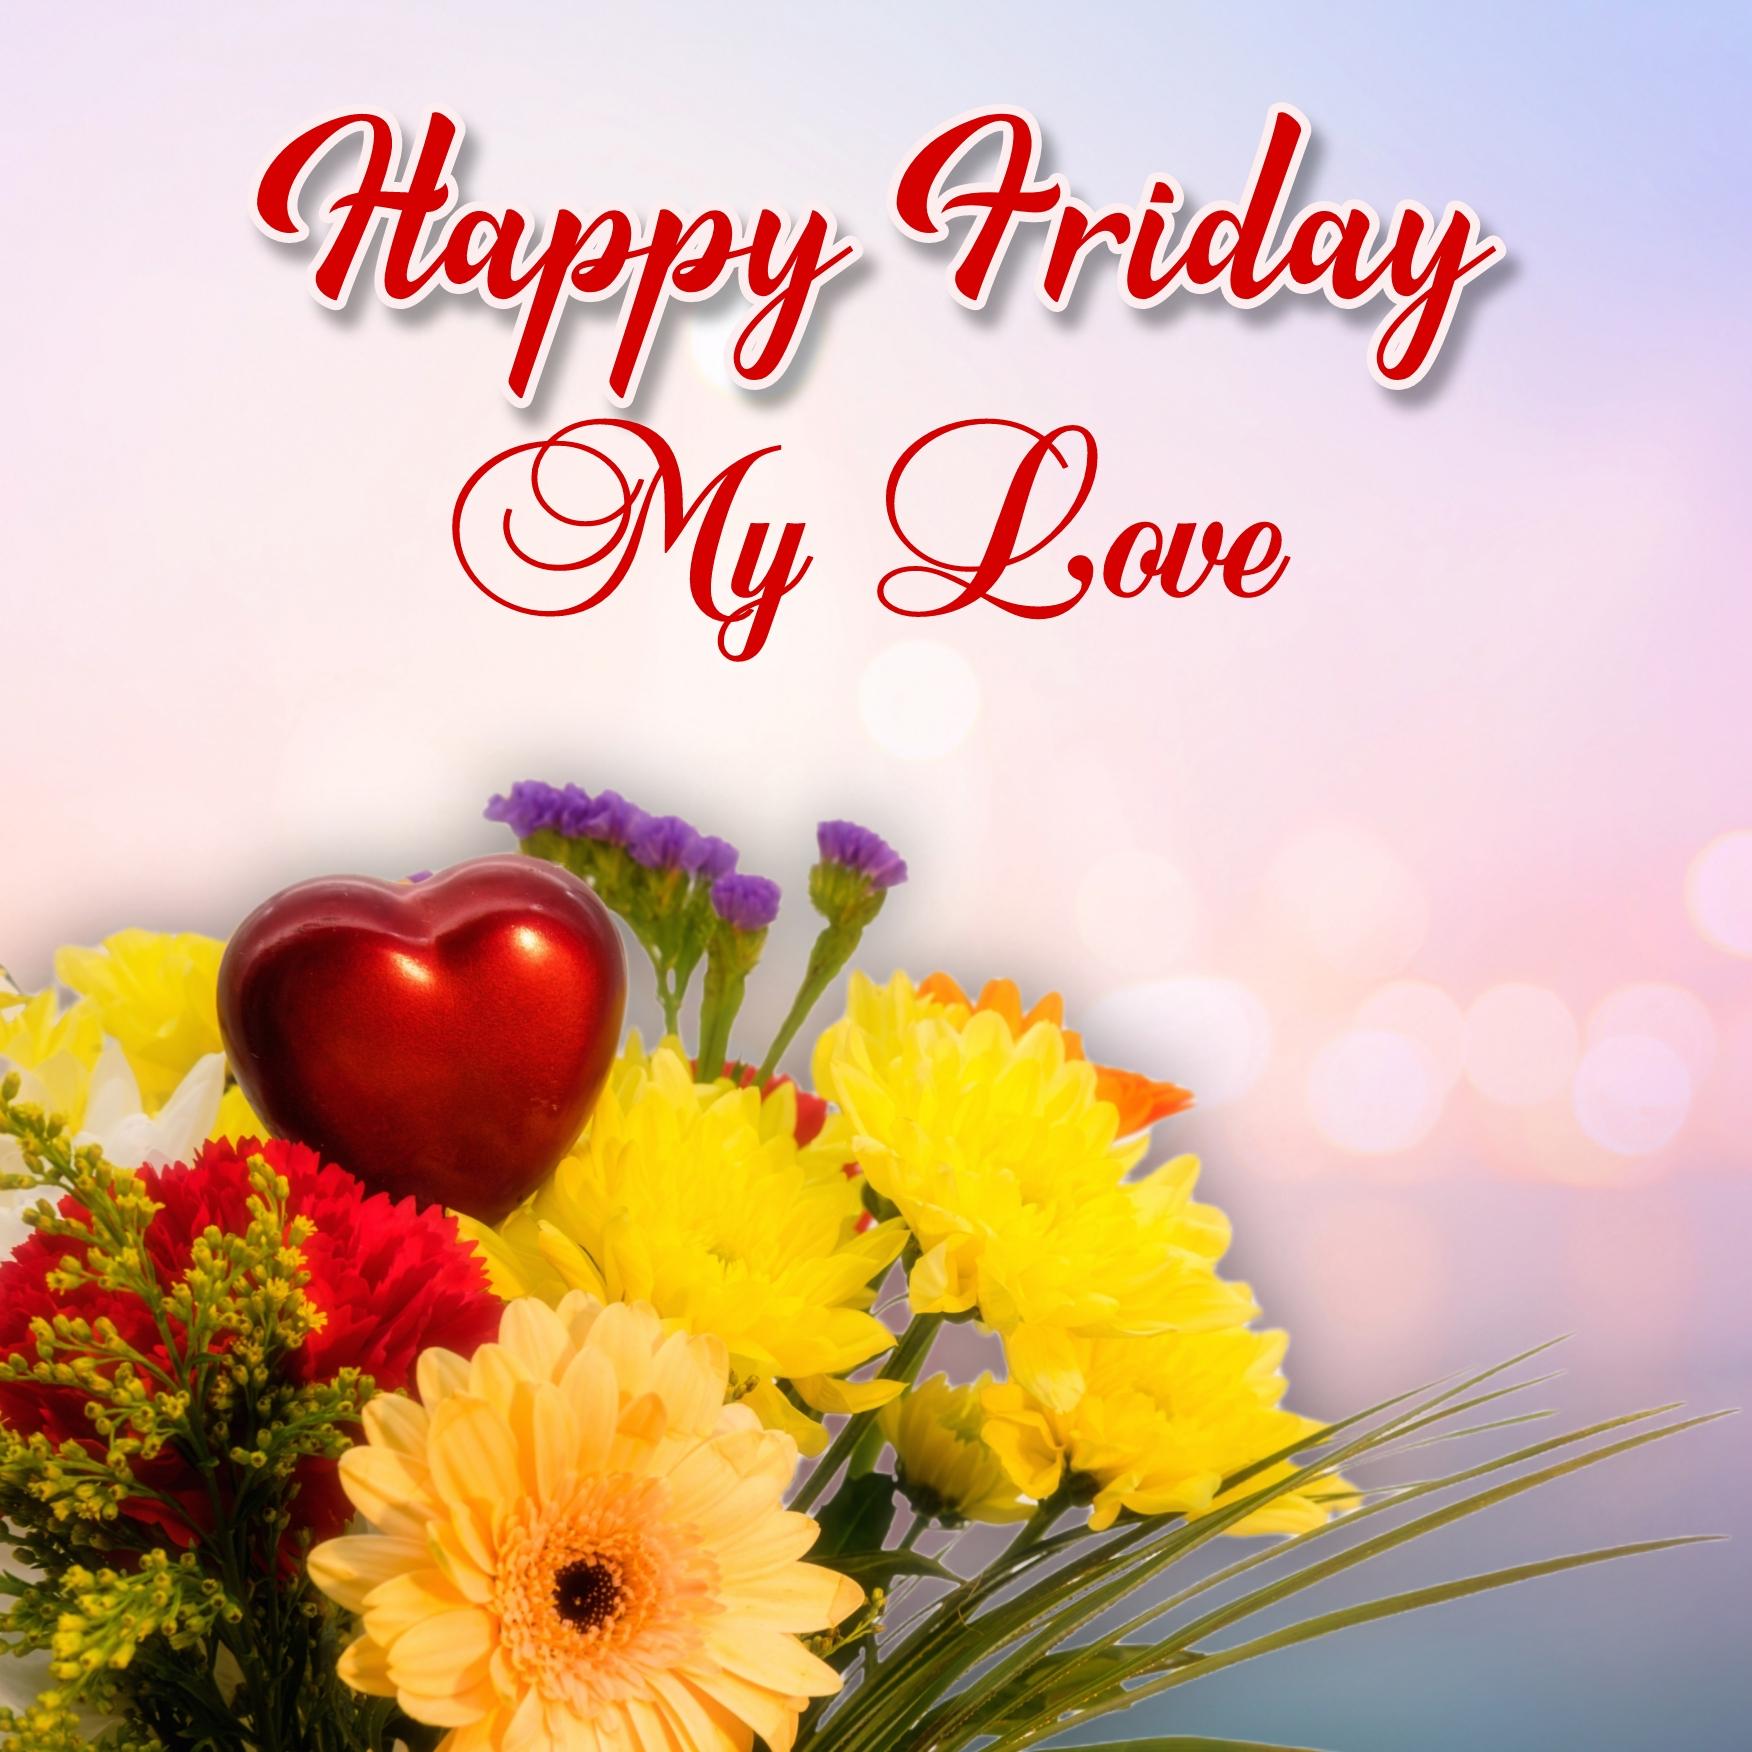 Happy Friday My Love Images for Wife